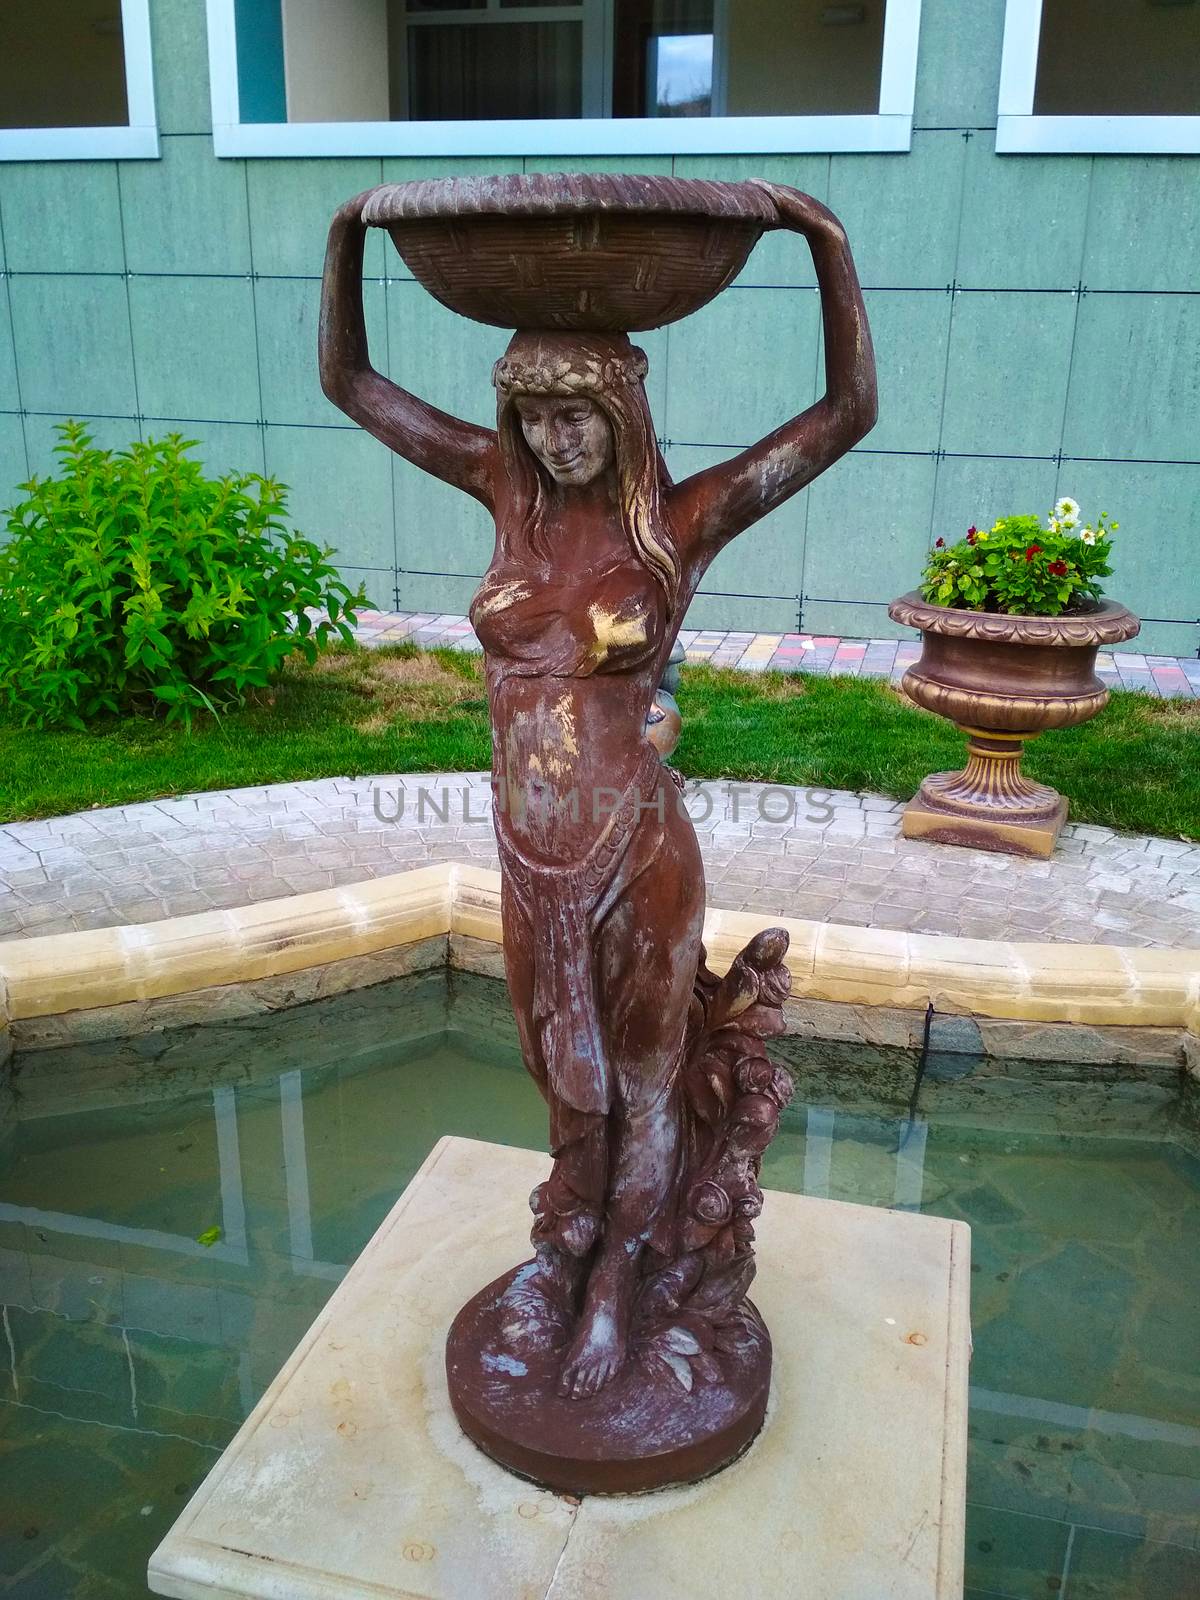 A statue of a girl in a brick-colored tunic with a tray and a wreath on her head.